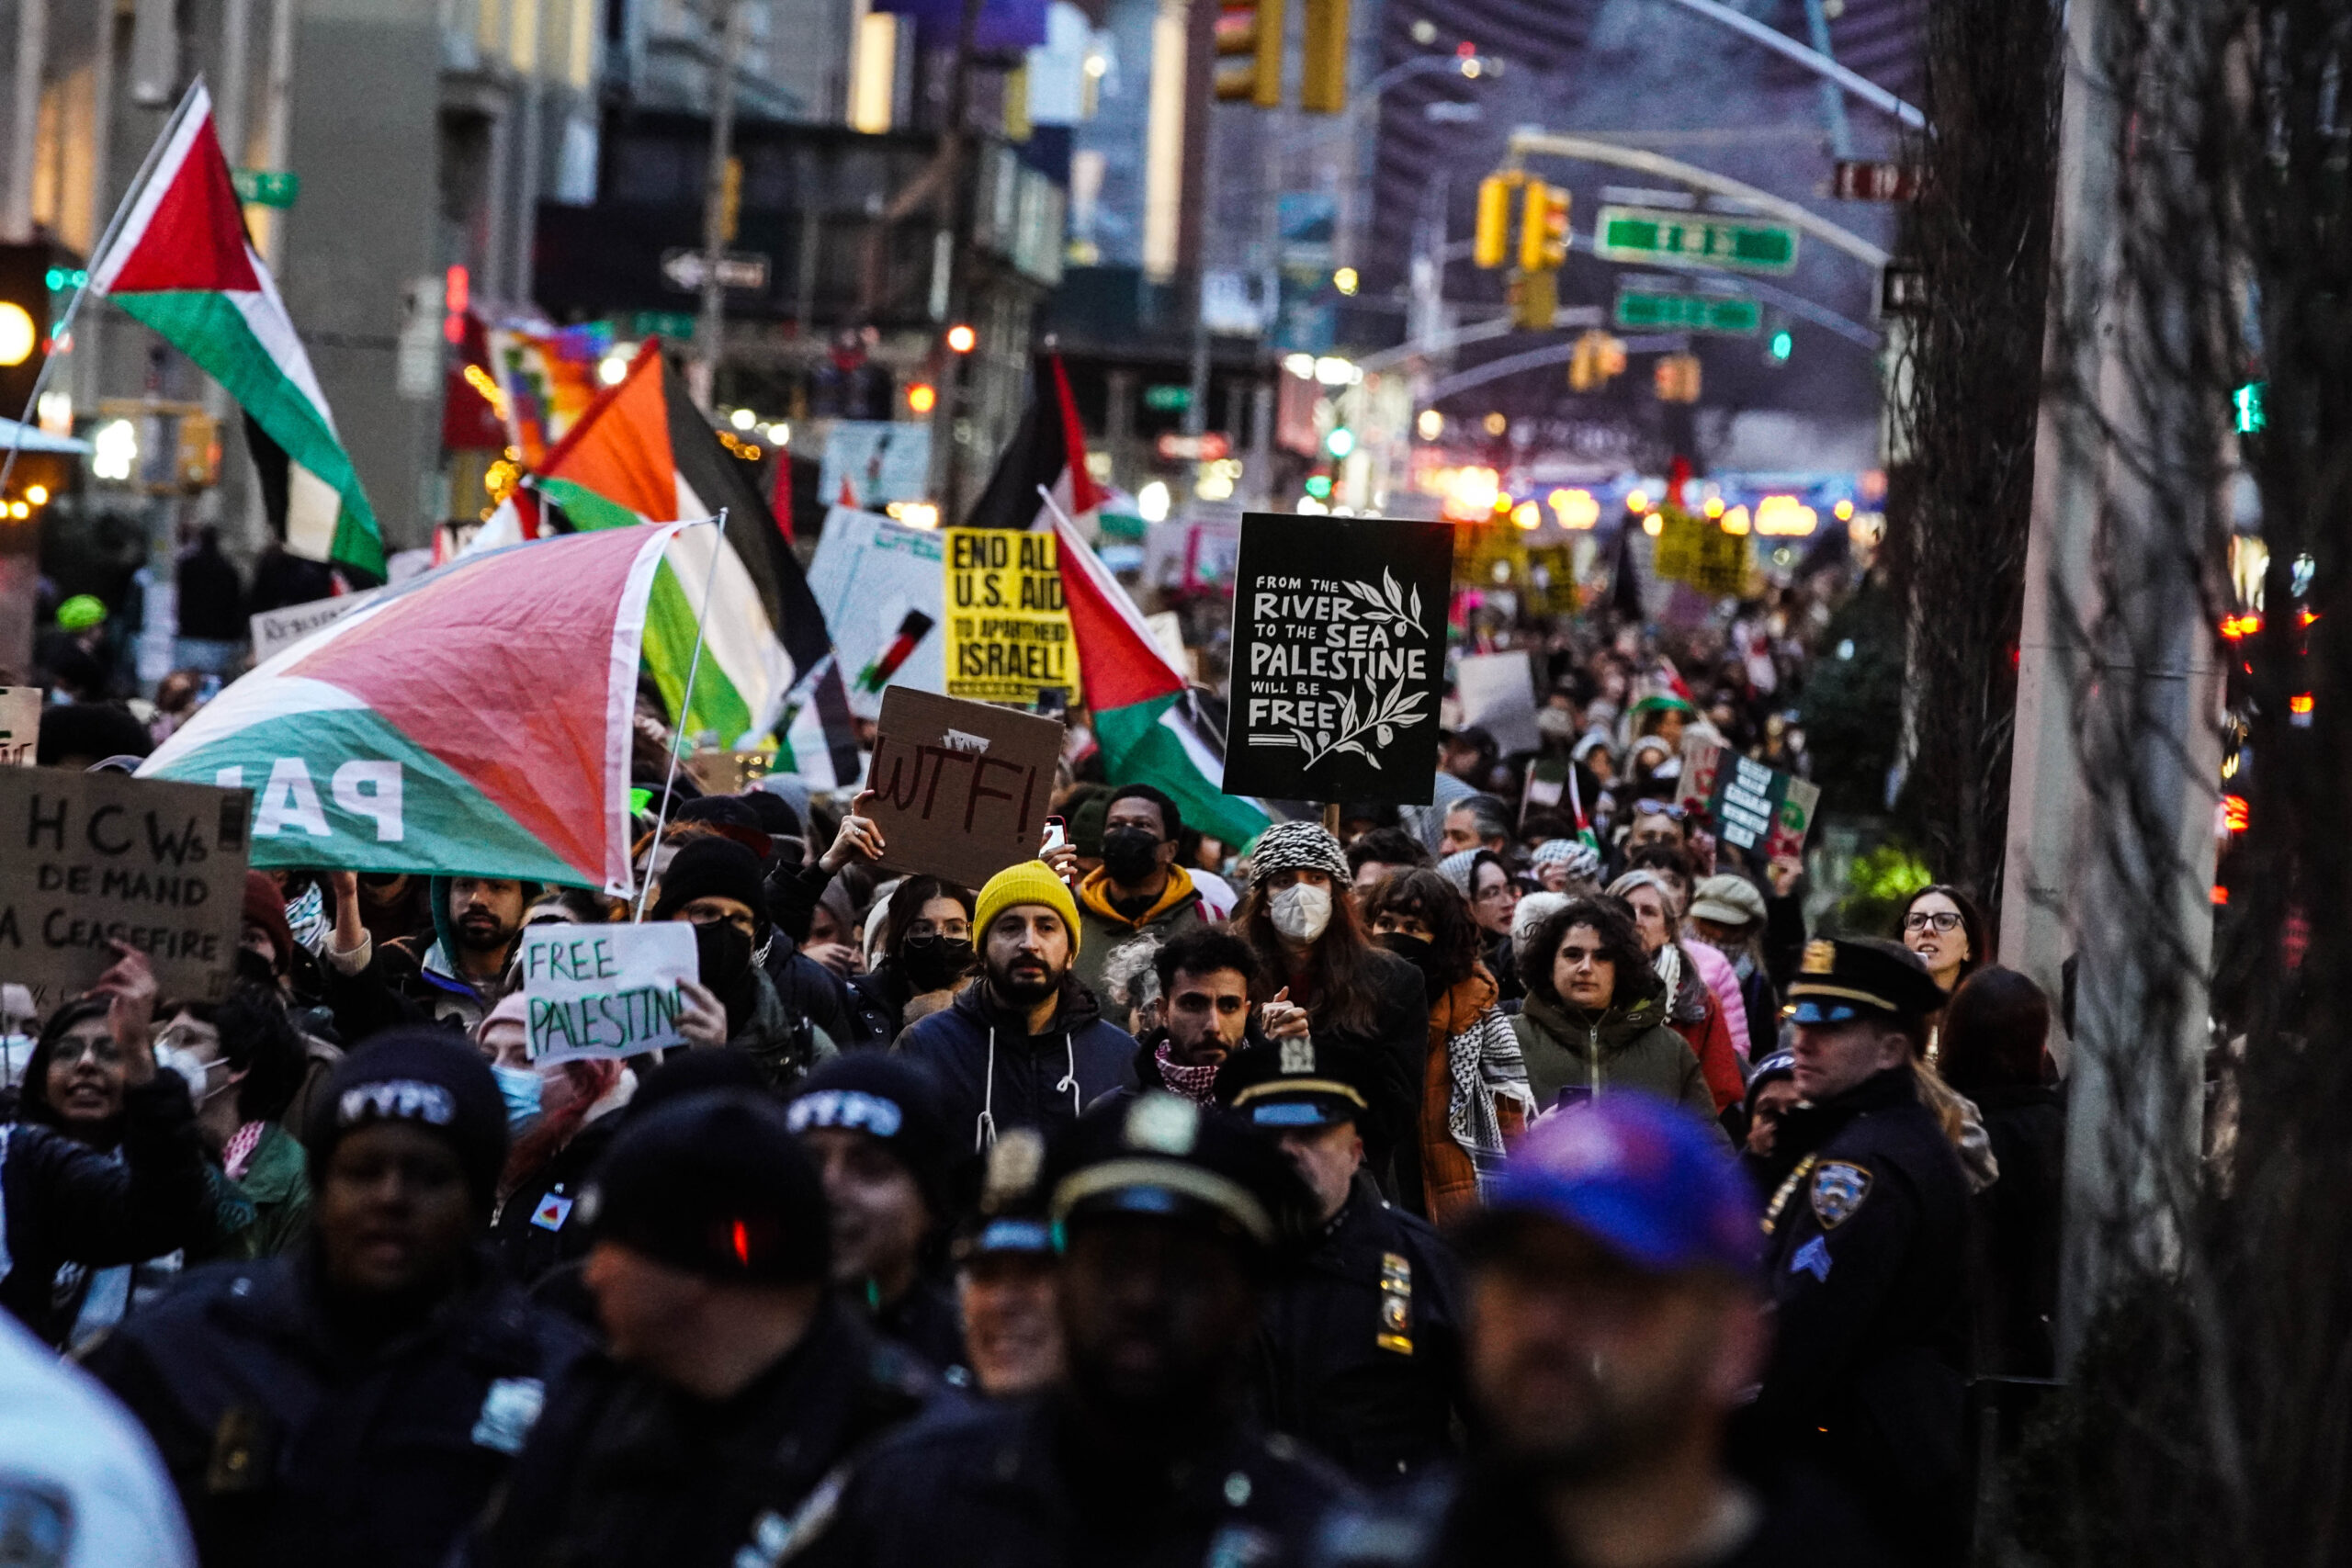 Large crowd of the protesters marching through the streets with NYPD at the the front many flags and and signs are raised in the air a prominent one reading “from the river to the sea Palestine will be free”